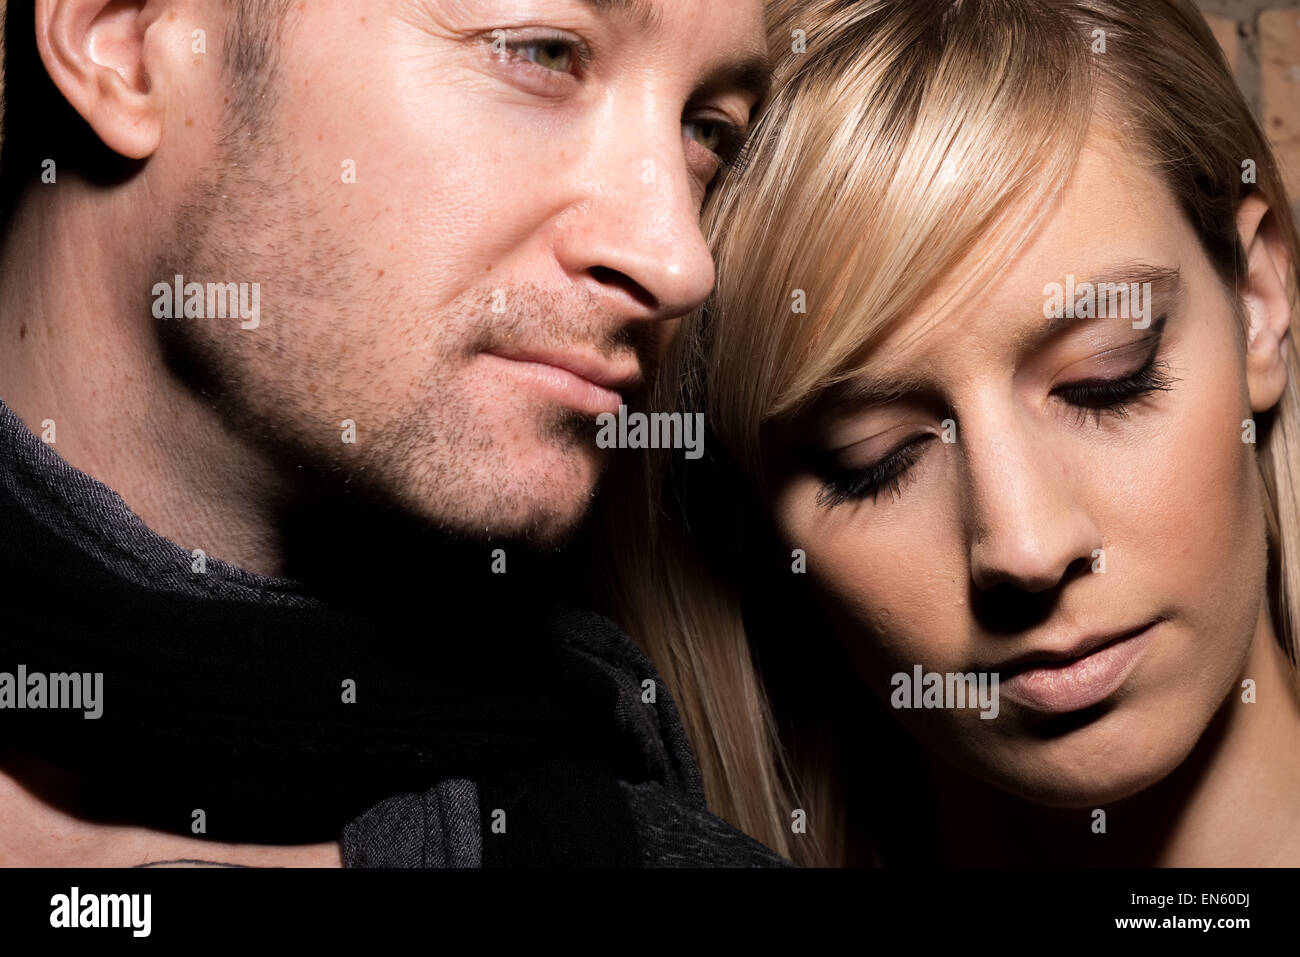 Portrait of man and woman in relationship in high contrast tight image Stock Photo